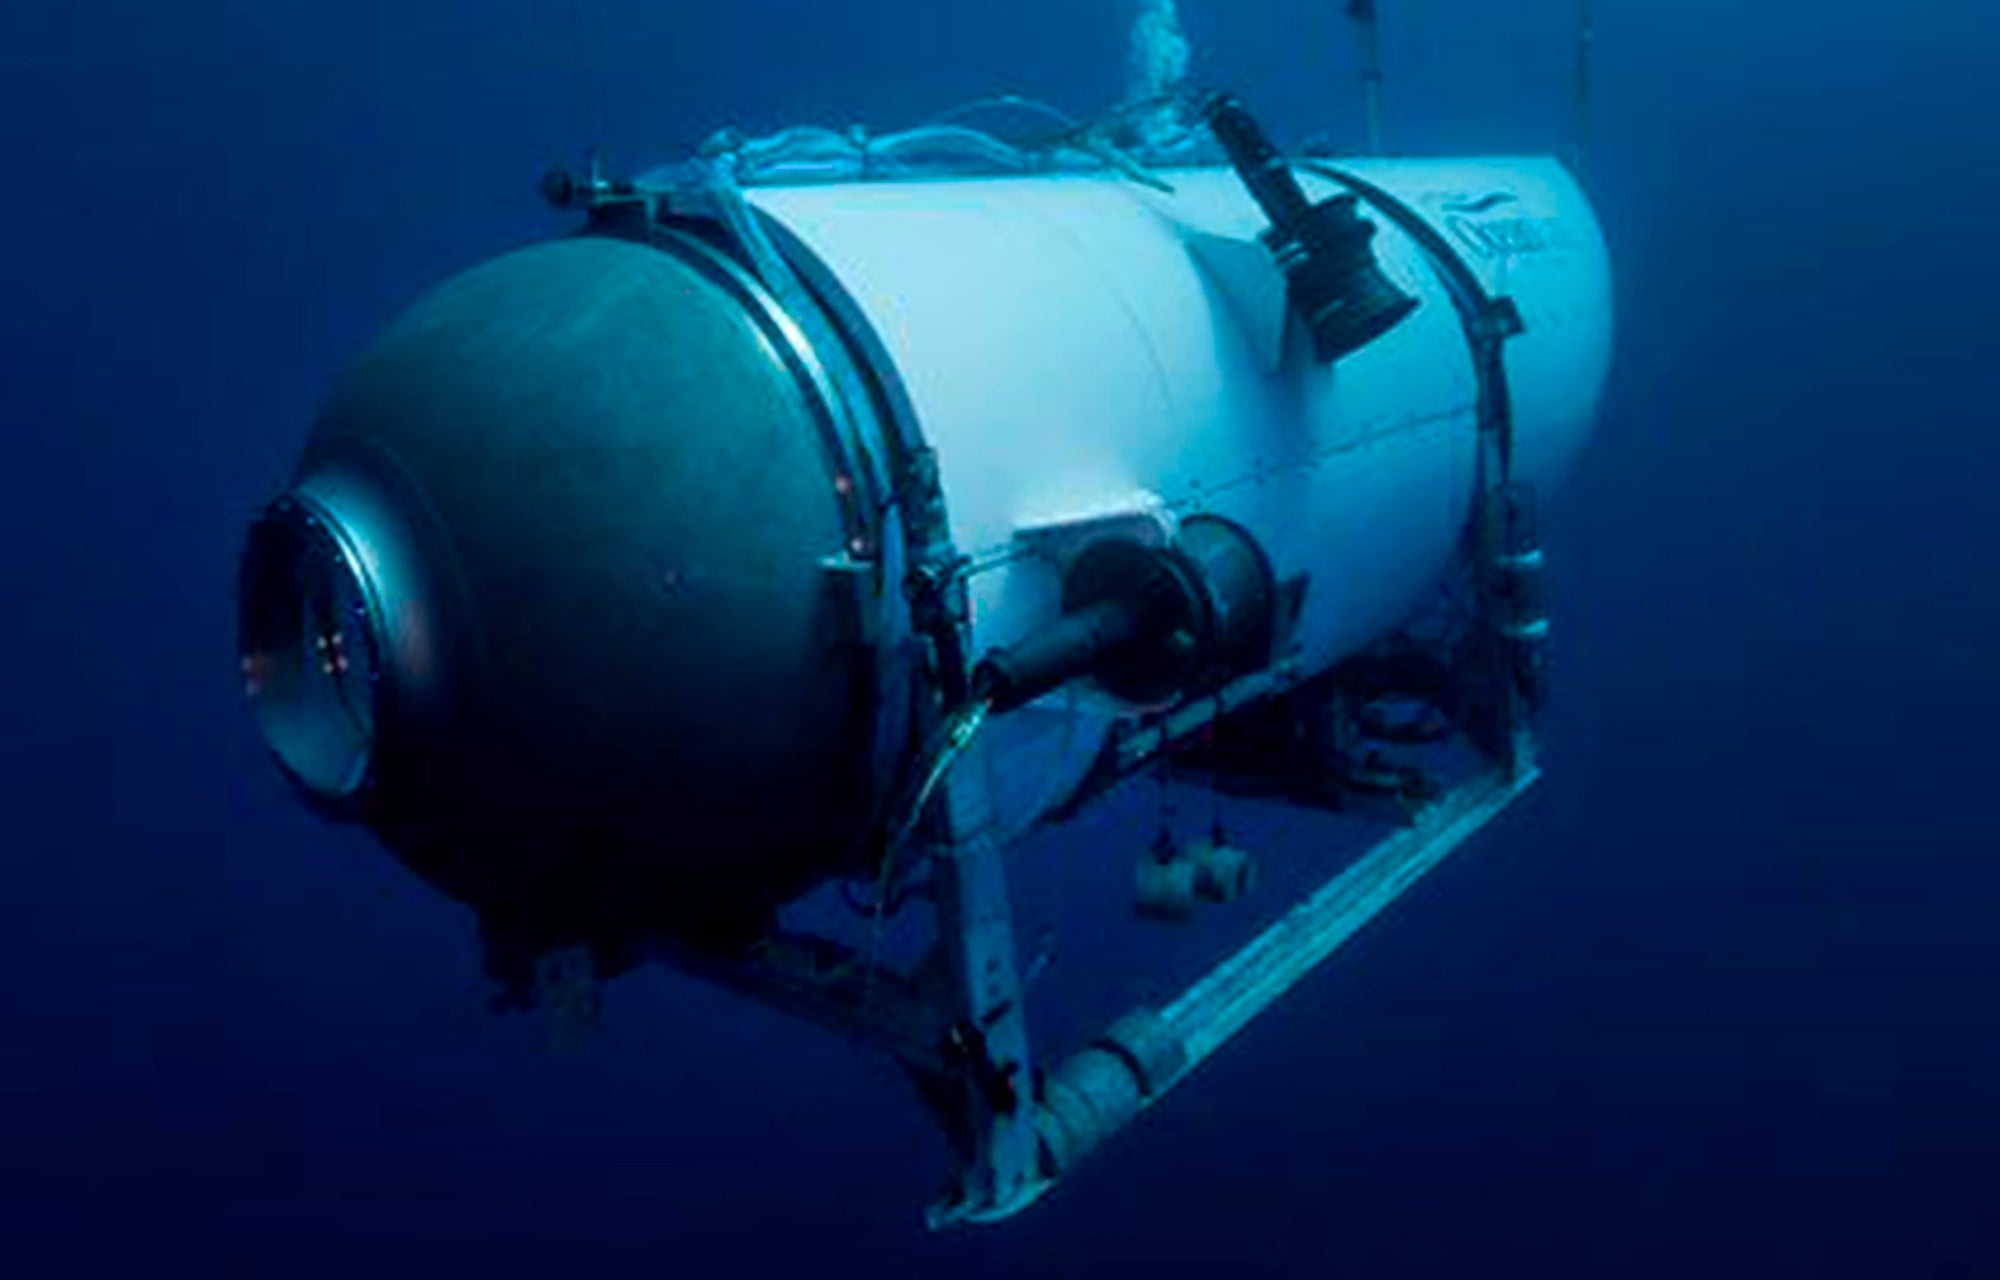 The Titan submersible killed five people when it imploded last June.